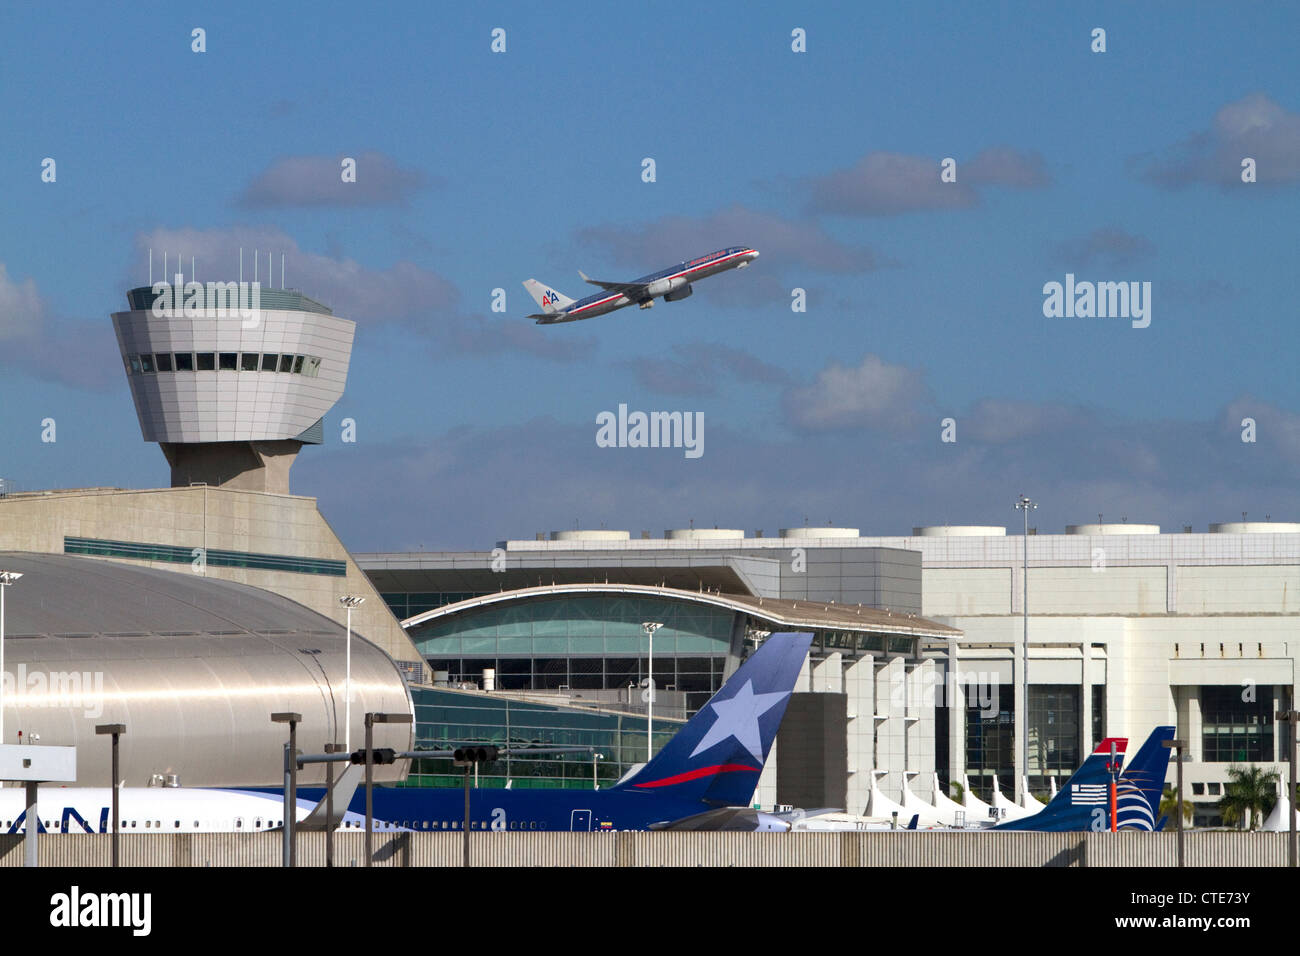 American Airlines Boeing 767 at take off from the Miami International Airport, Florida, USA. Stock Photo